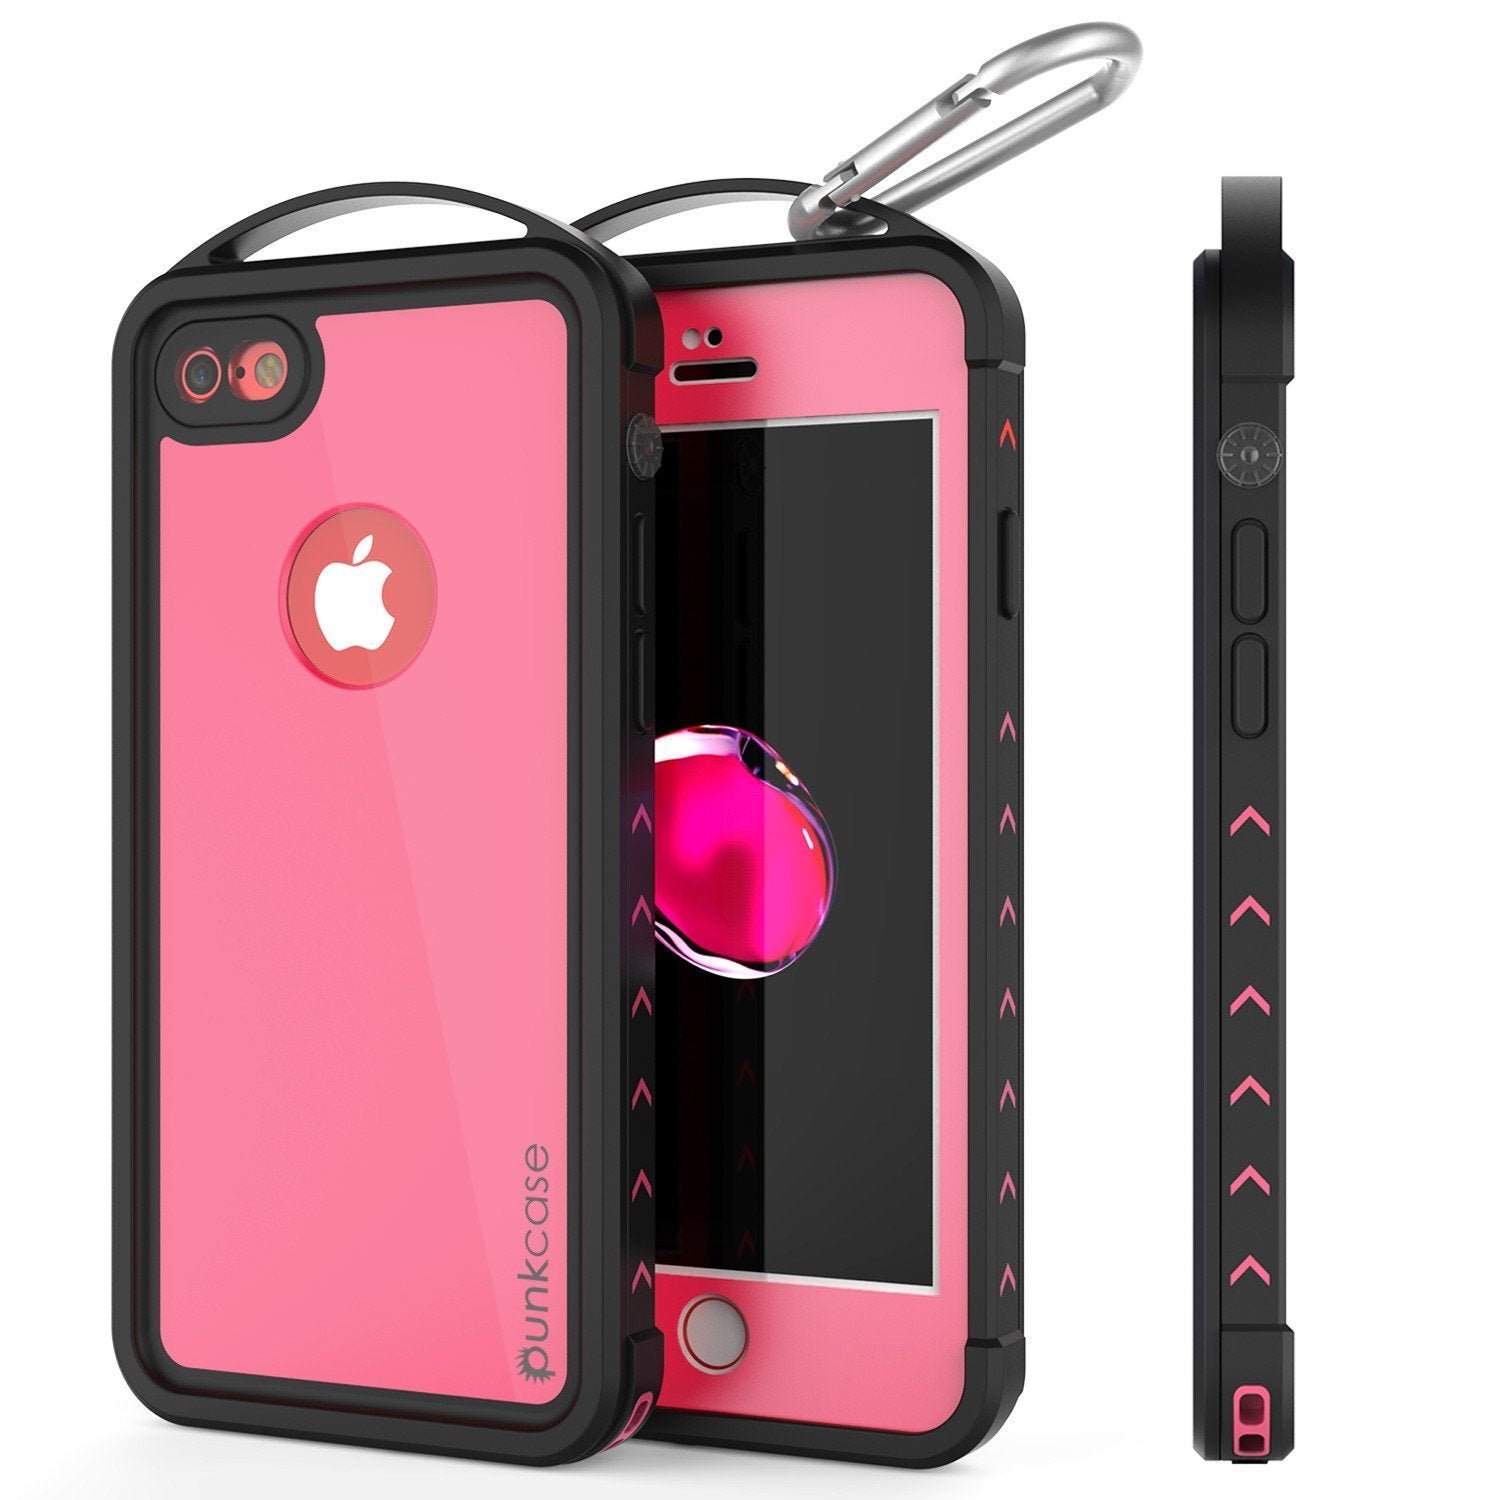 iPhone SE (4.7") Waterproof Case, Punkcase ALPINE Series, Pink | Heavy Duty Armor Cover (Color in image: pink)